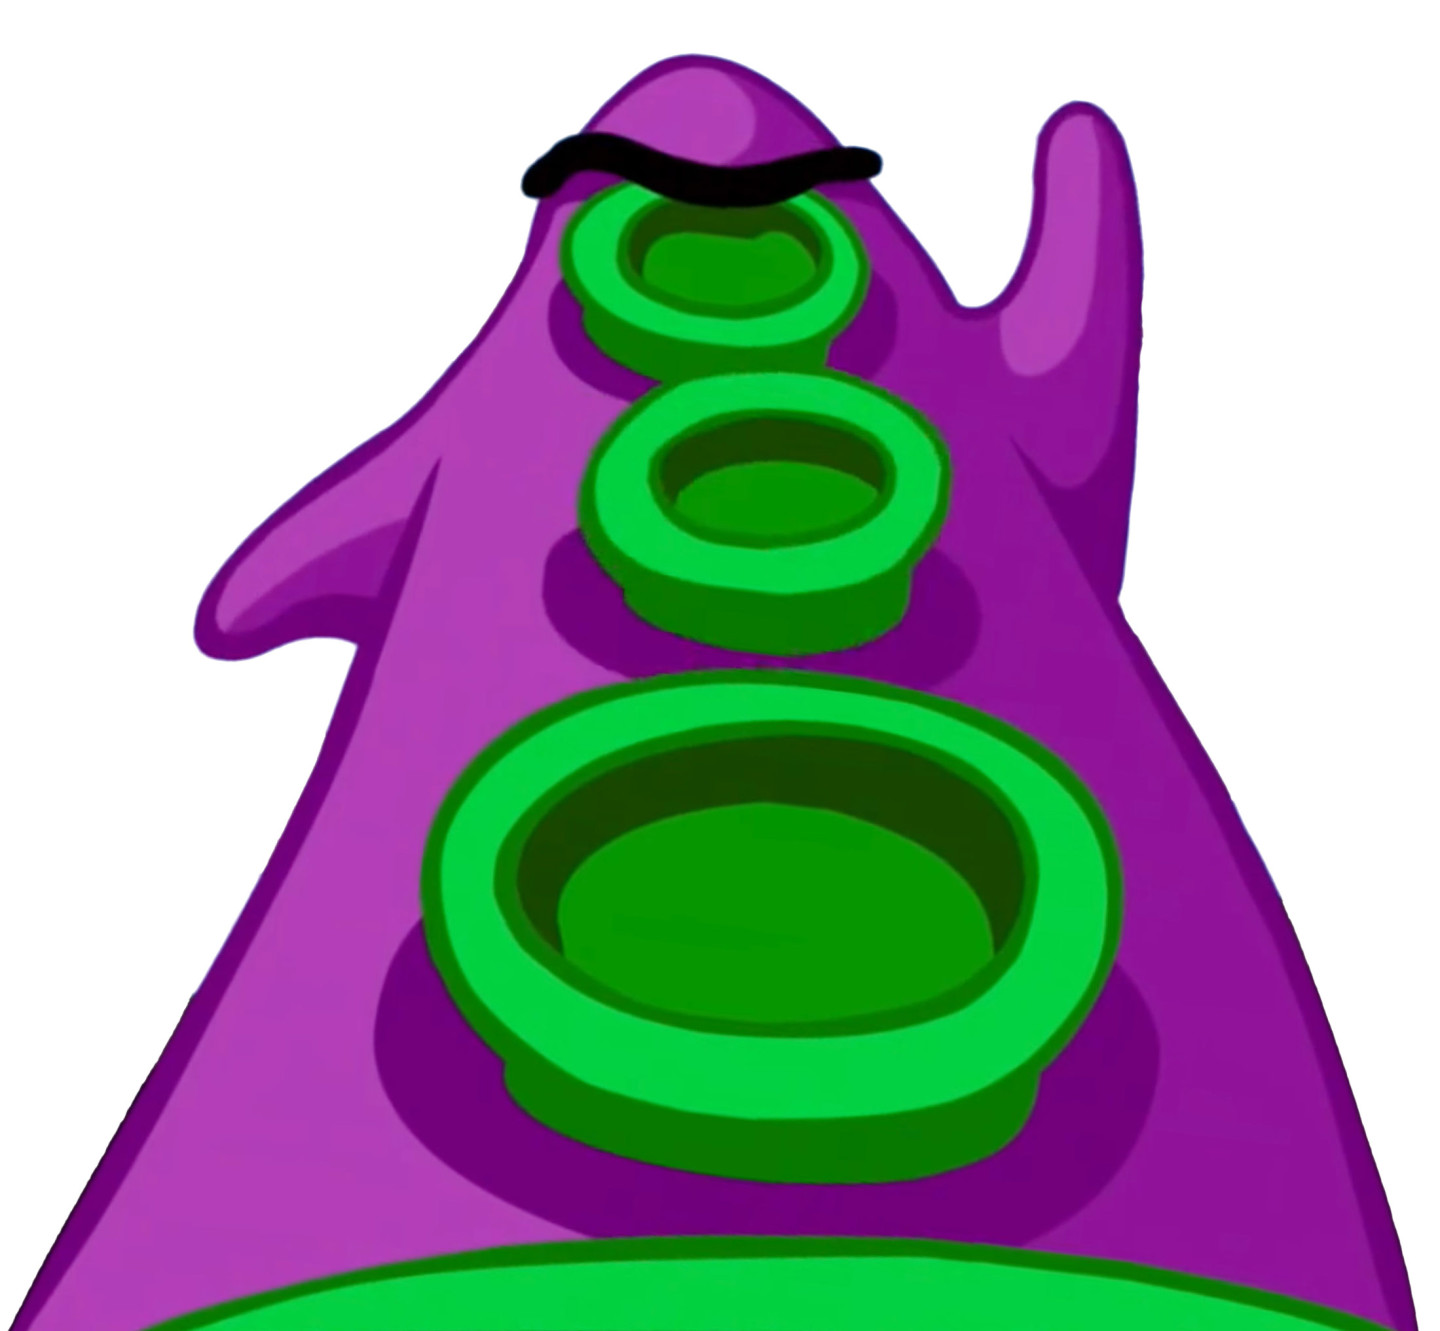 DAy Of ThE TEnTACLE